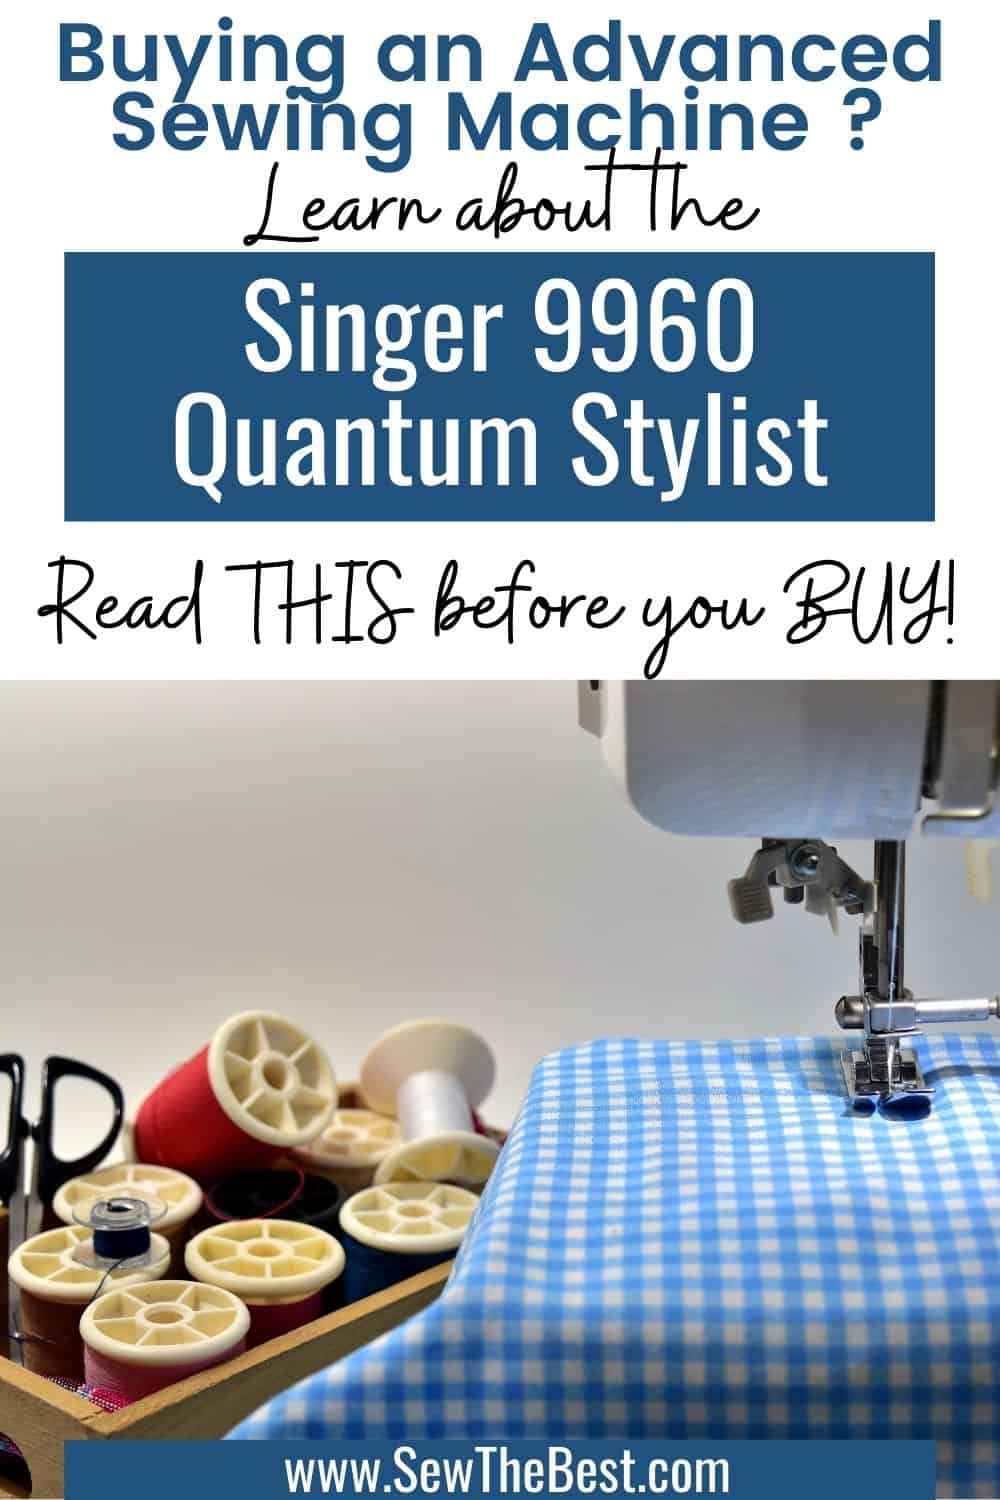 Buying an advanced sewing machine? Learn about the Singer 9960 Quantum Stylist. Read this Singer Quantum Stylist 9960 review before you buy. #AD #SewingMachine #sewing